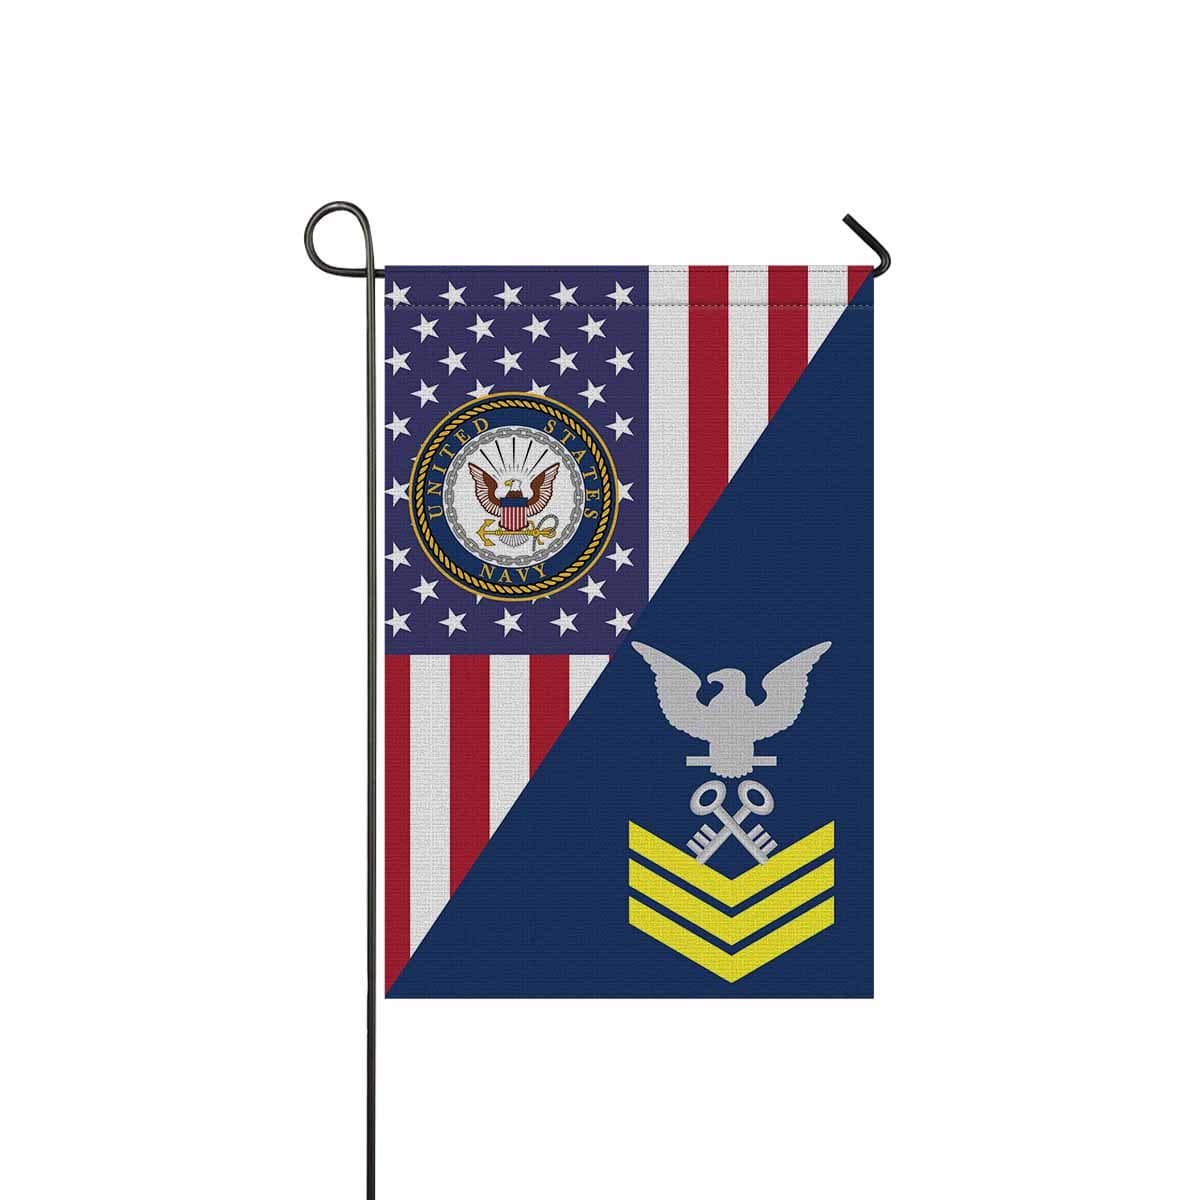 Navy Storekeeper Navy SK E-6 Gold Stripe Garden Flag/Yard Flag 12 inches x 18 inches Twin-Side Printing-GDFlag-Navy-Rating-Veterans Nation